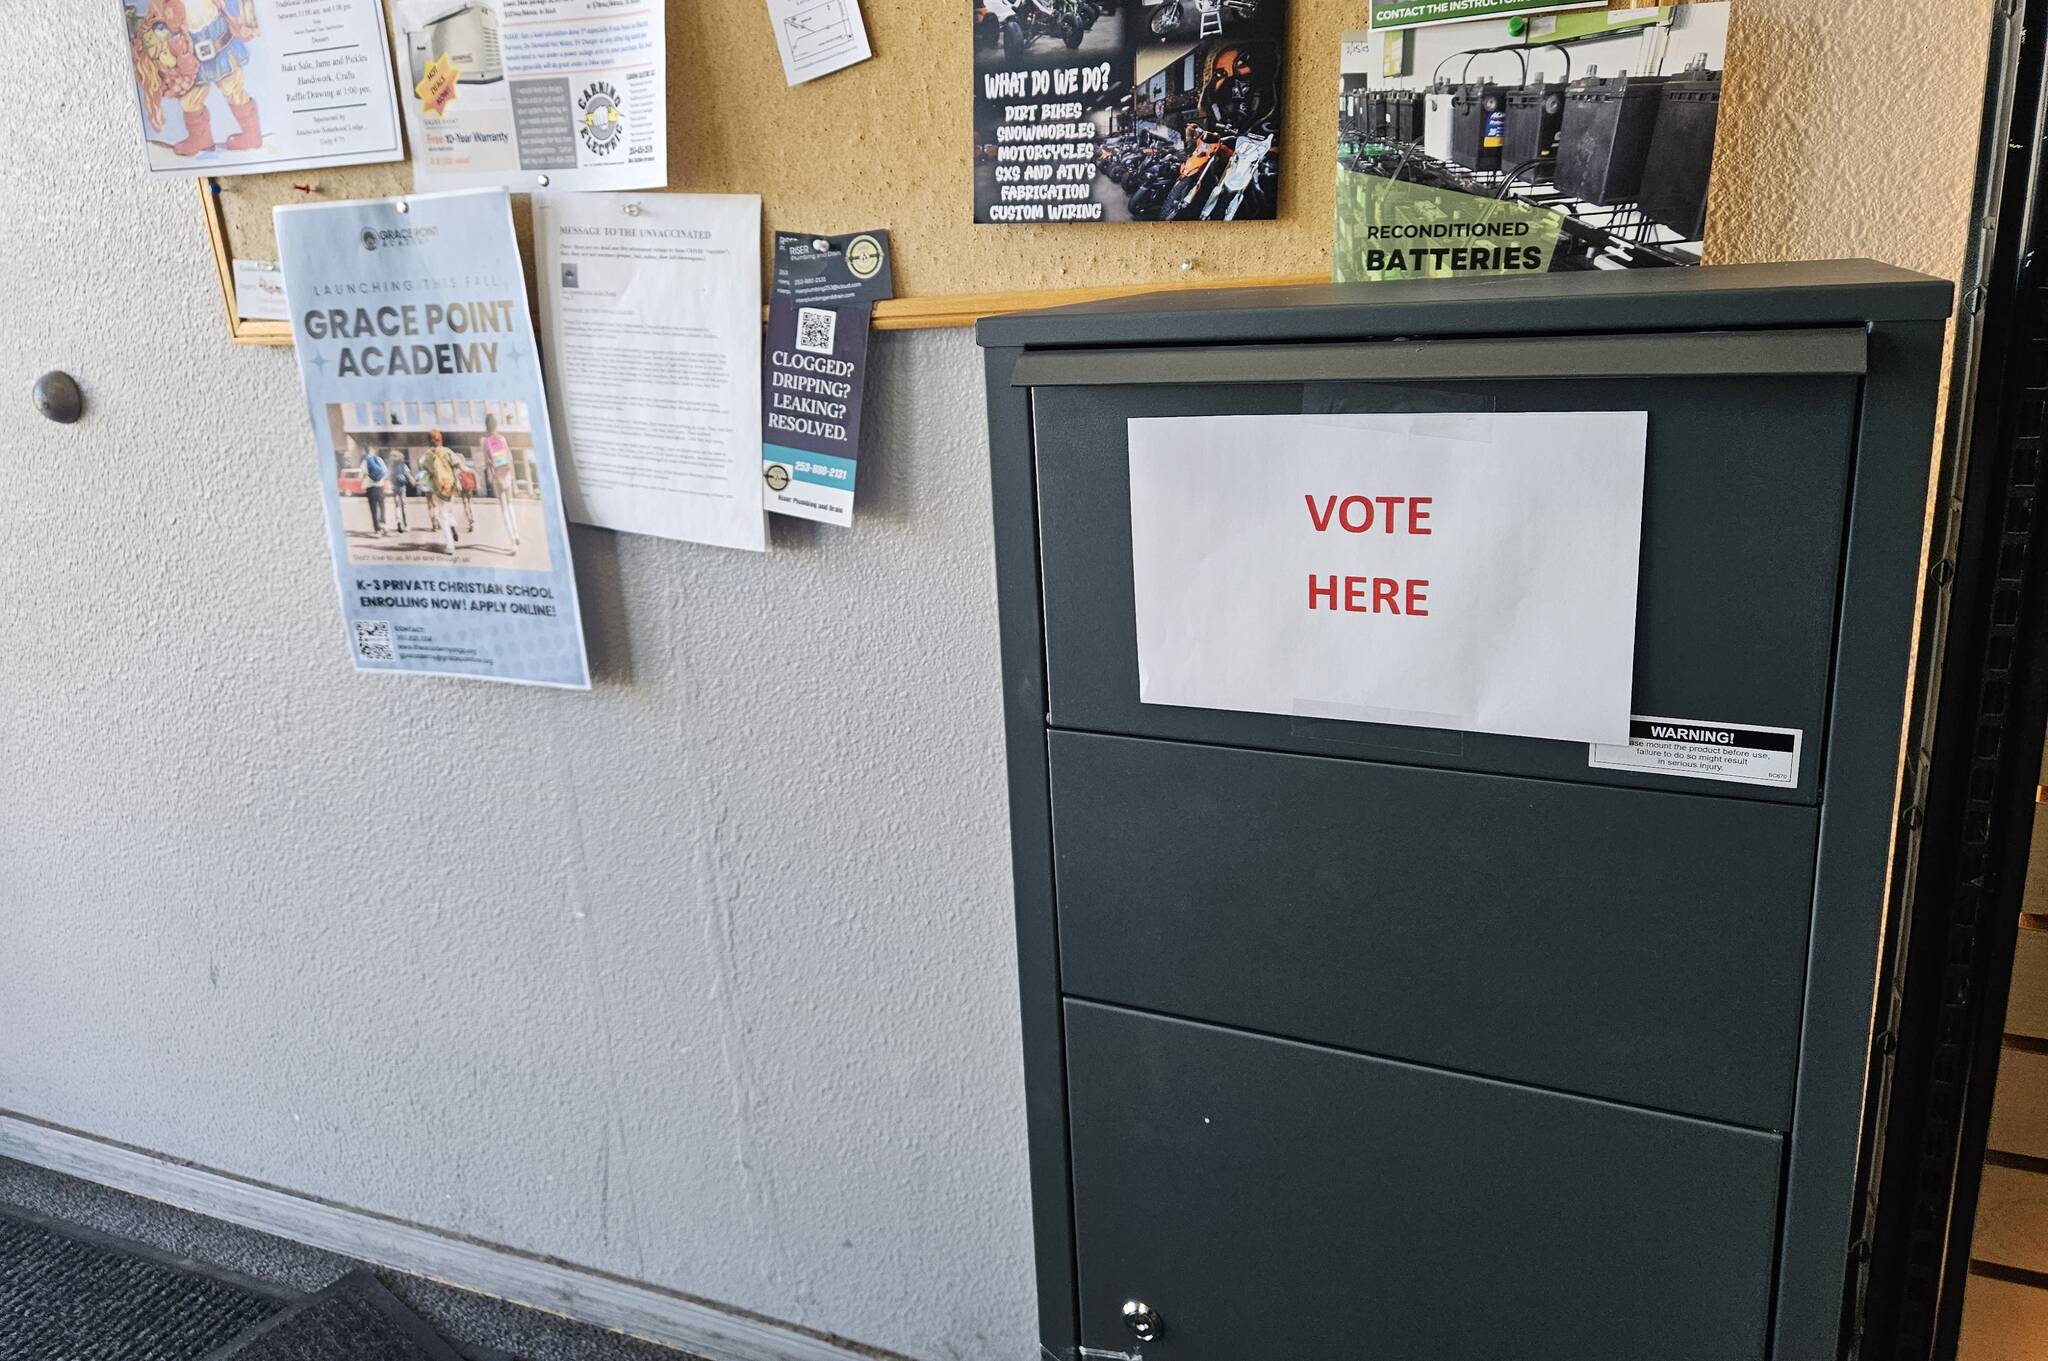 Photo by Ray Miller-Still/Sound Publishing
It’s legal in Washington to be a third-party ballot collector, but election officials strongly suggest using official drop boxes instead.